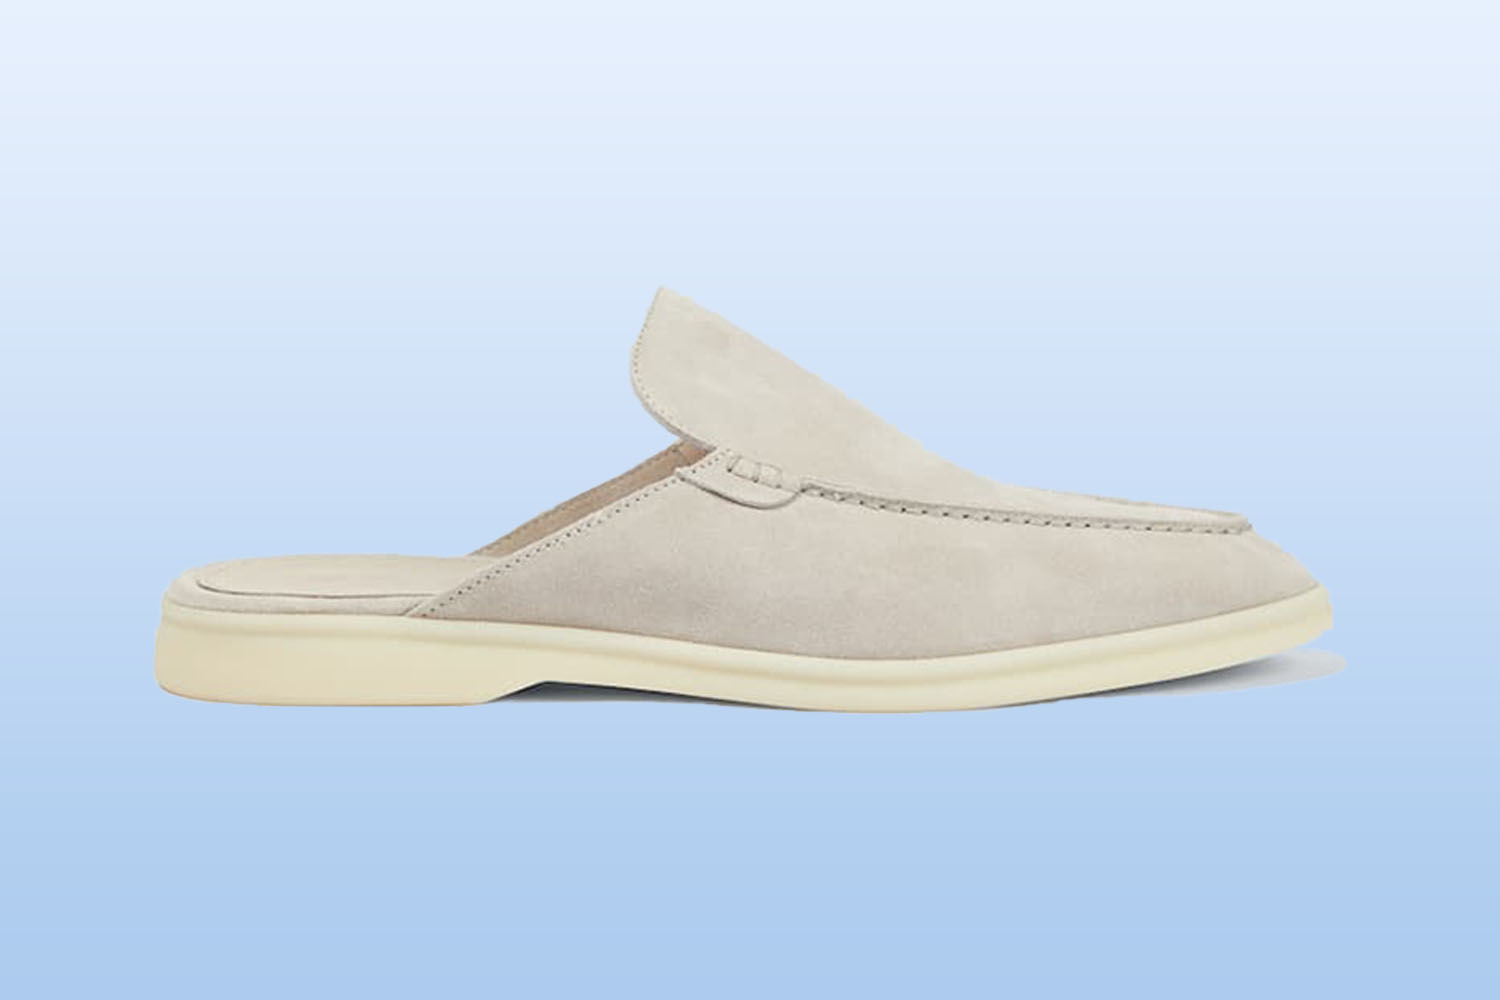 a suede backless loafer from mytheresa on a light blue background